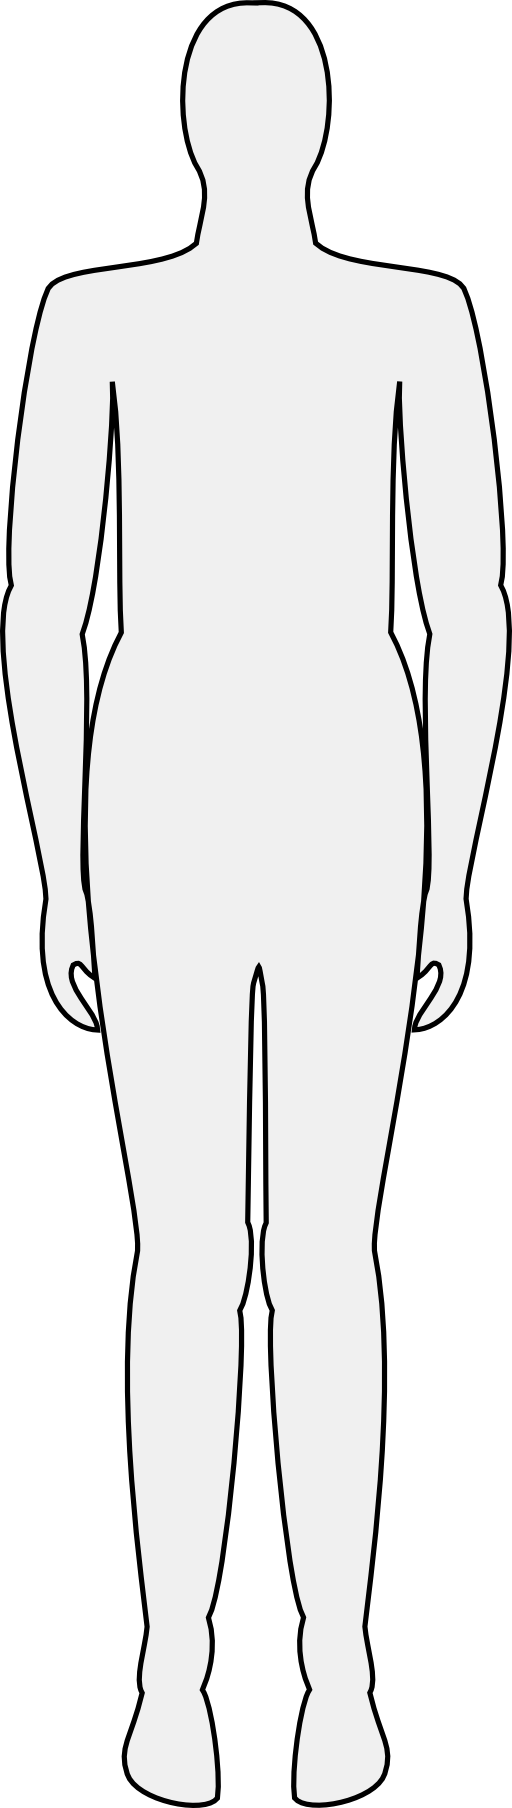 Male Body Silhouette Clipart Royalty Free Public ...